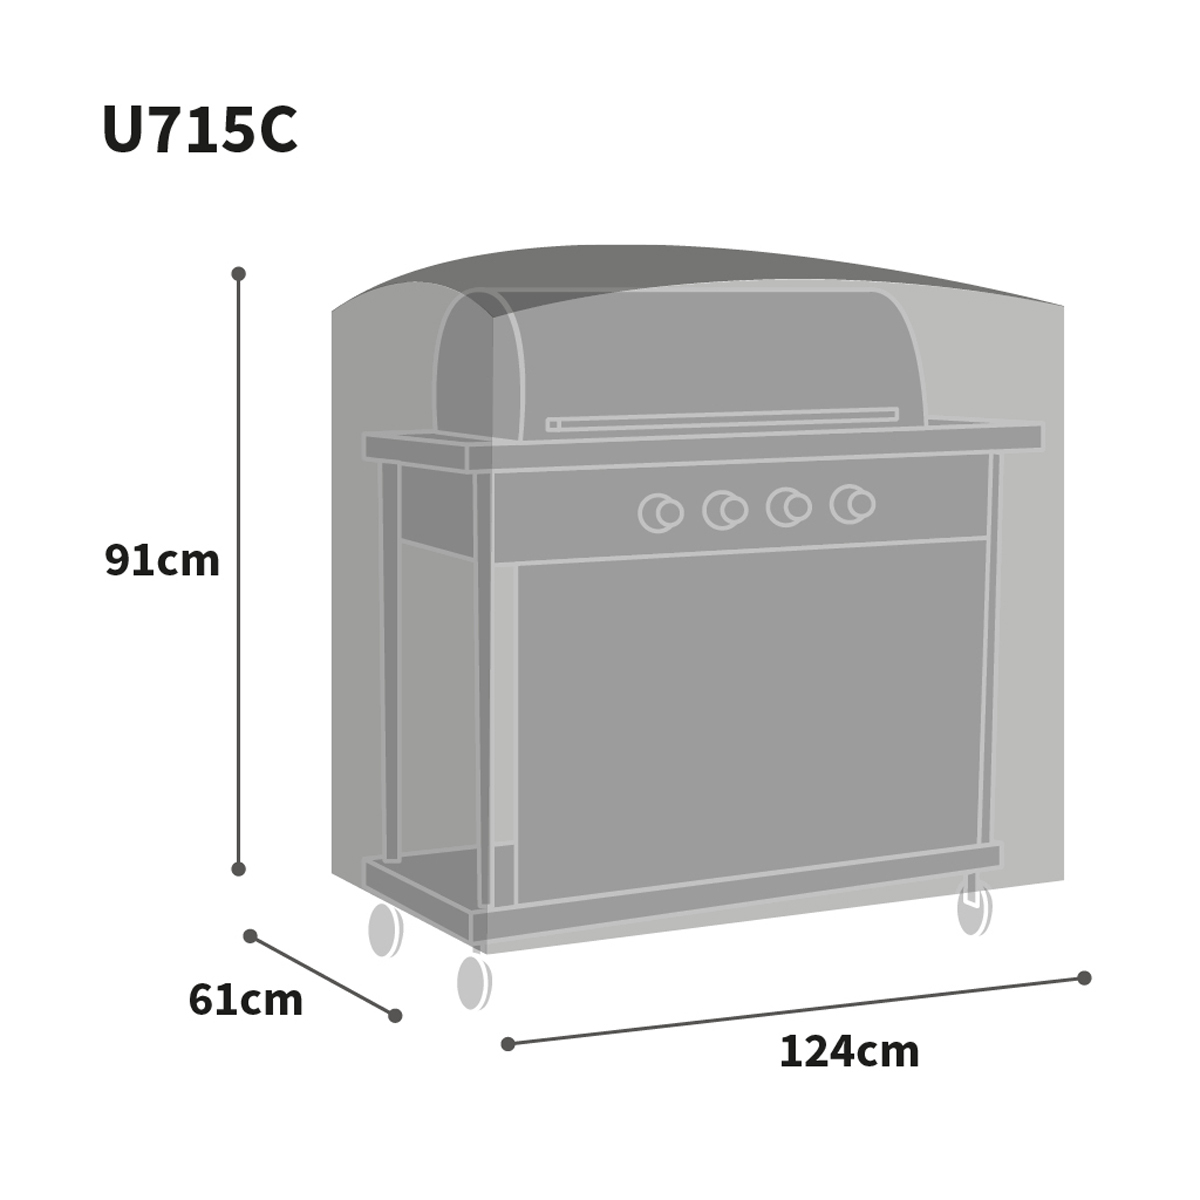 Bosmere Ultimate Protector Wagon Barbecue Graphic Size Guide